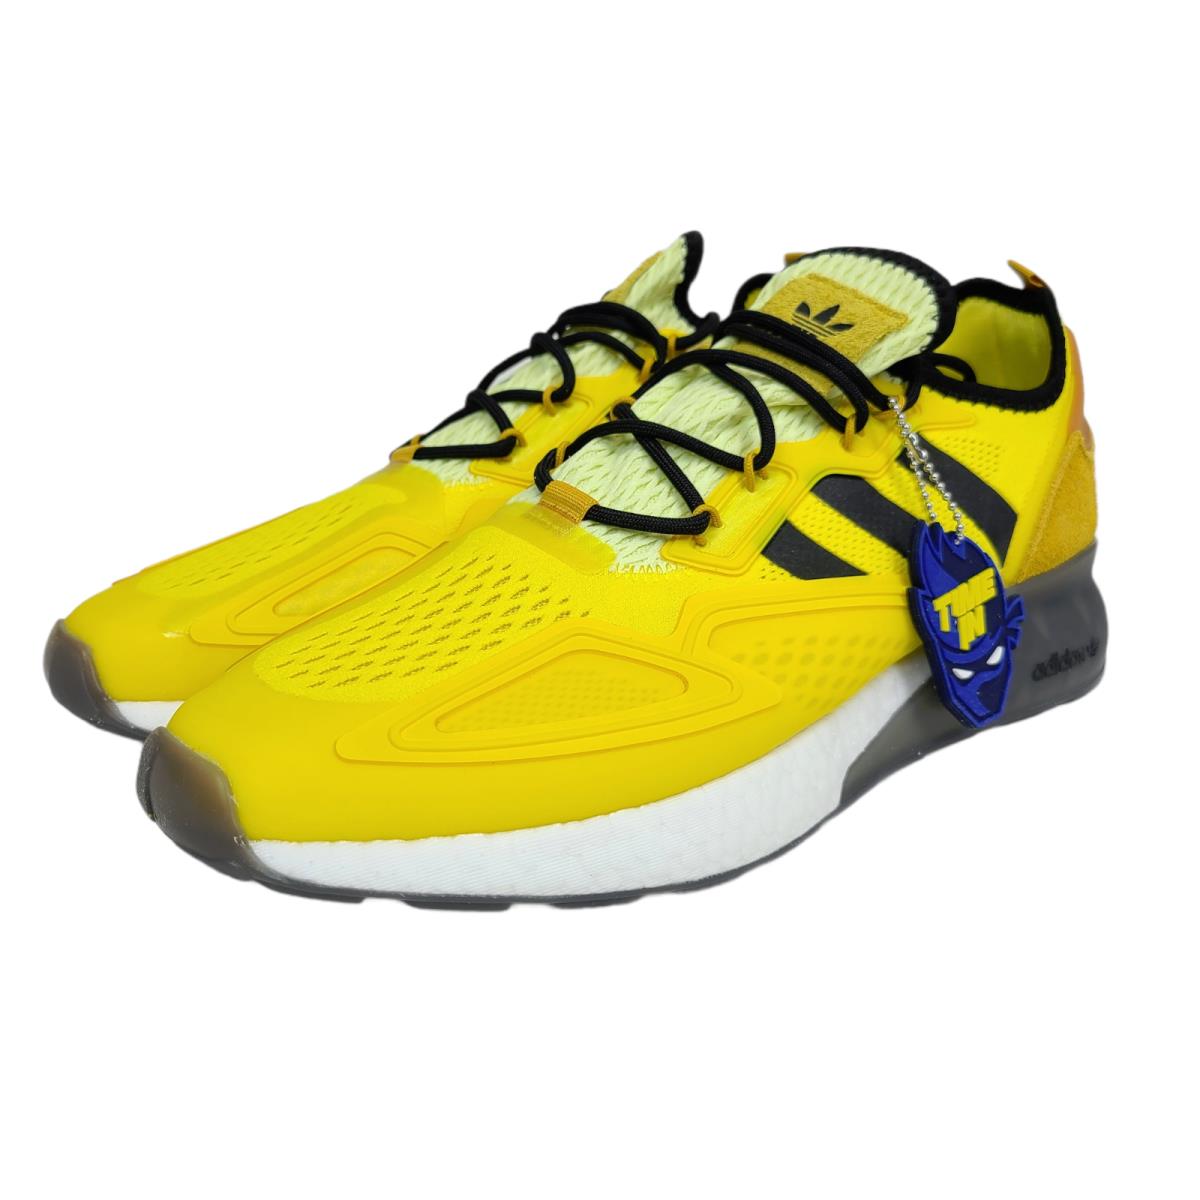 Adidas shoes Boost - Yellow 10